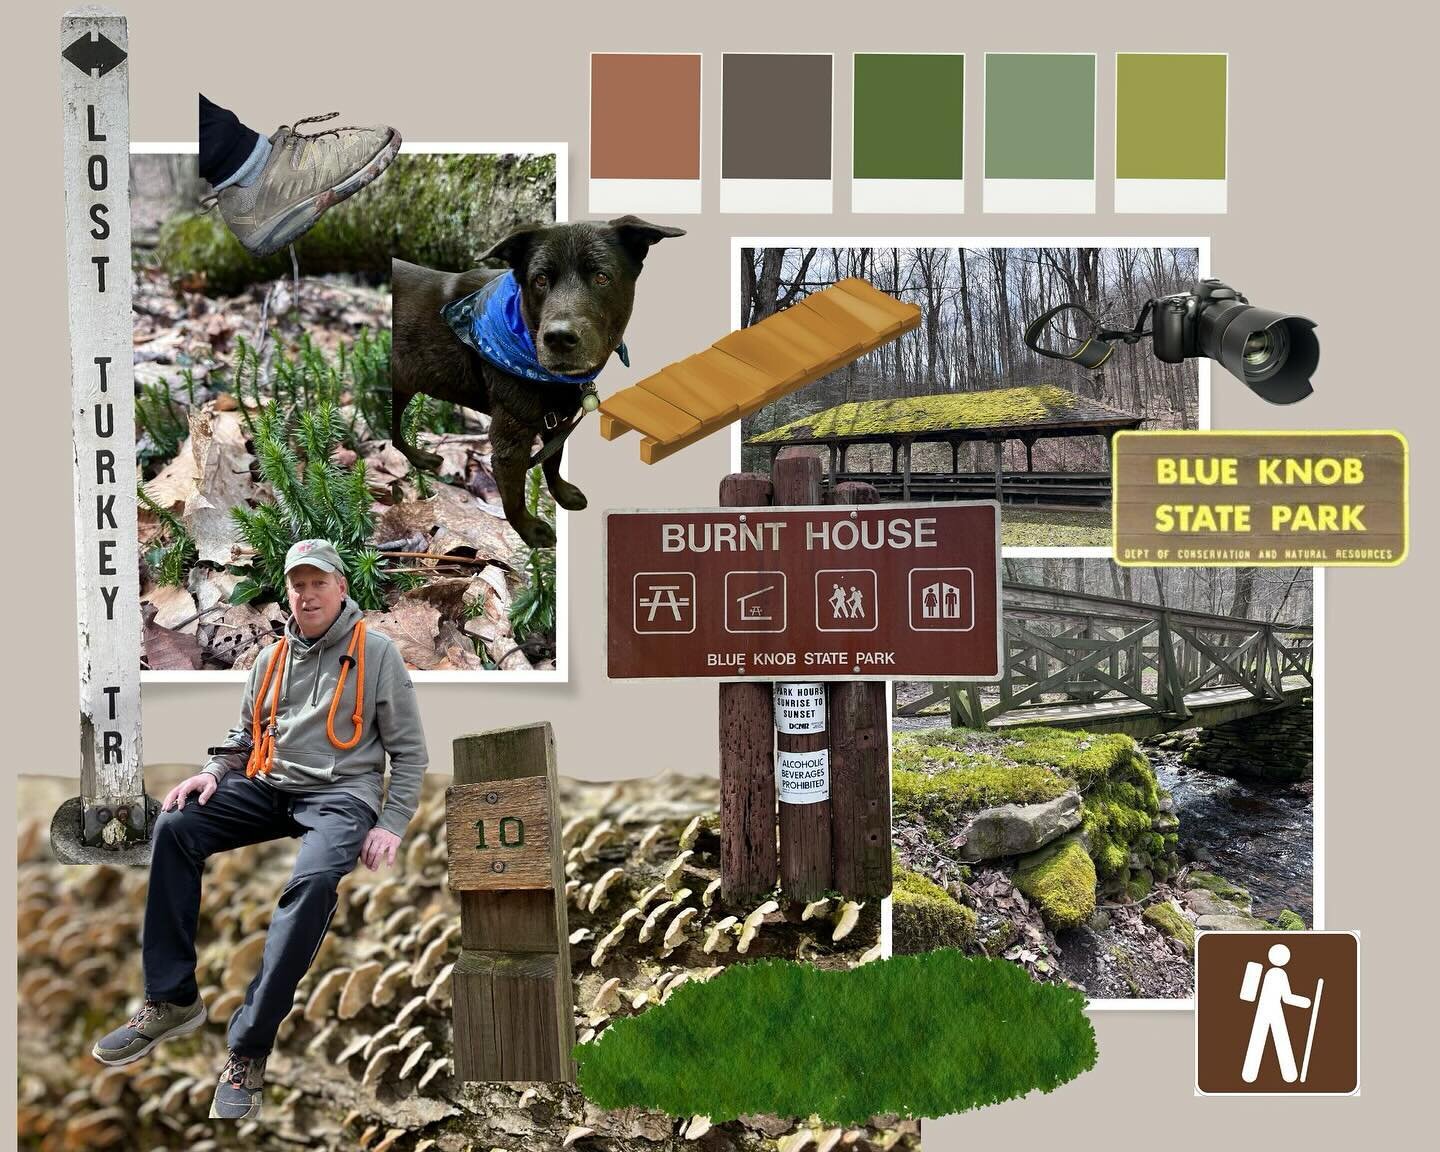 📍Lost Turkey Trail, Burnt House Cabin 

Mood Board for Lost Turkey Trail, Burnt House Cabin edit. One of my personal favorite local trails to hike with my Dad! 

Hikes with Haley, hosted by Bedford native and entrepreneur Haley Feaster, are monthly 